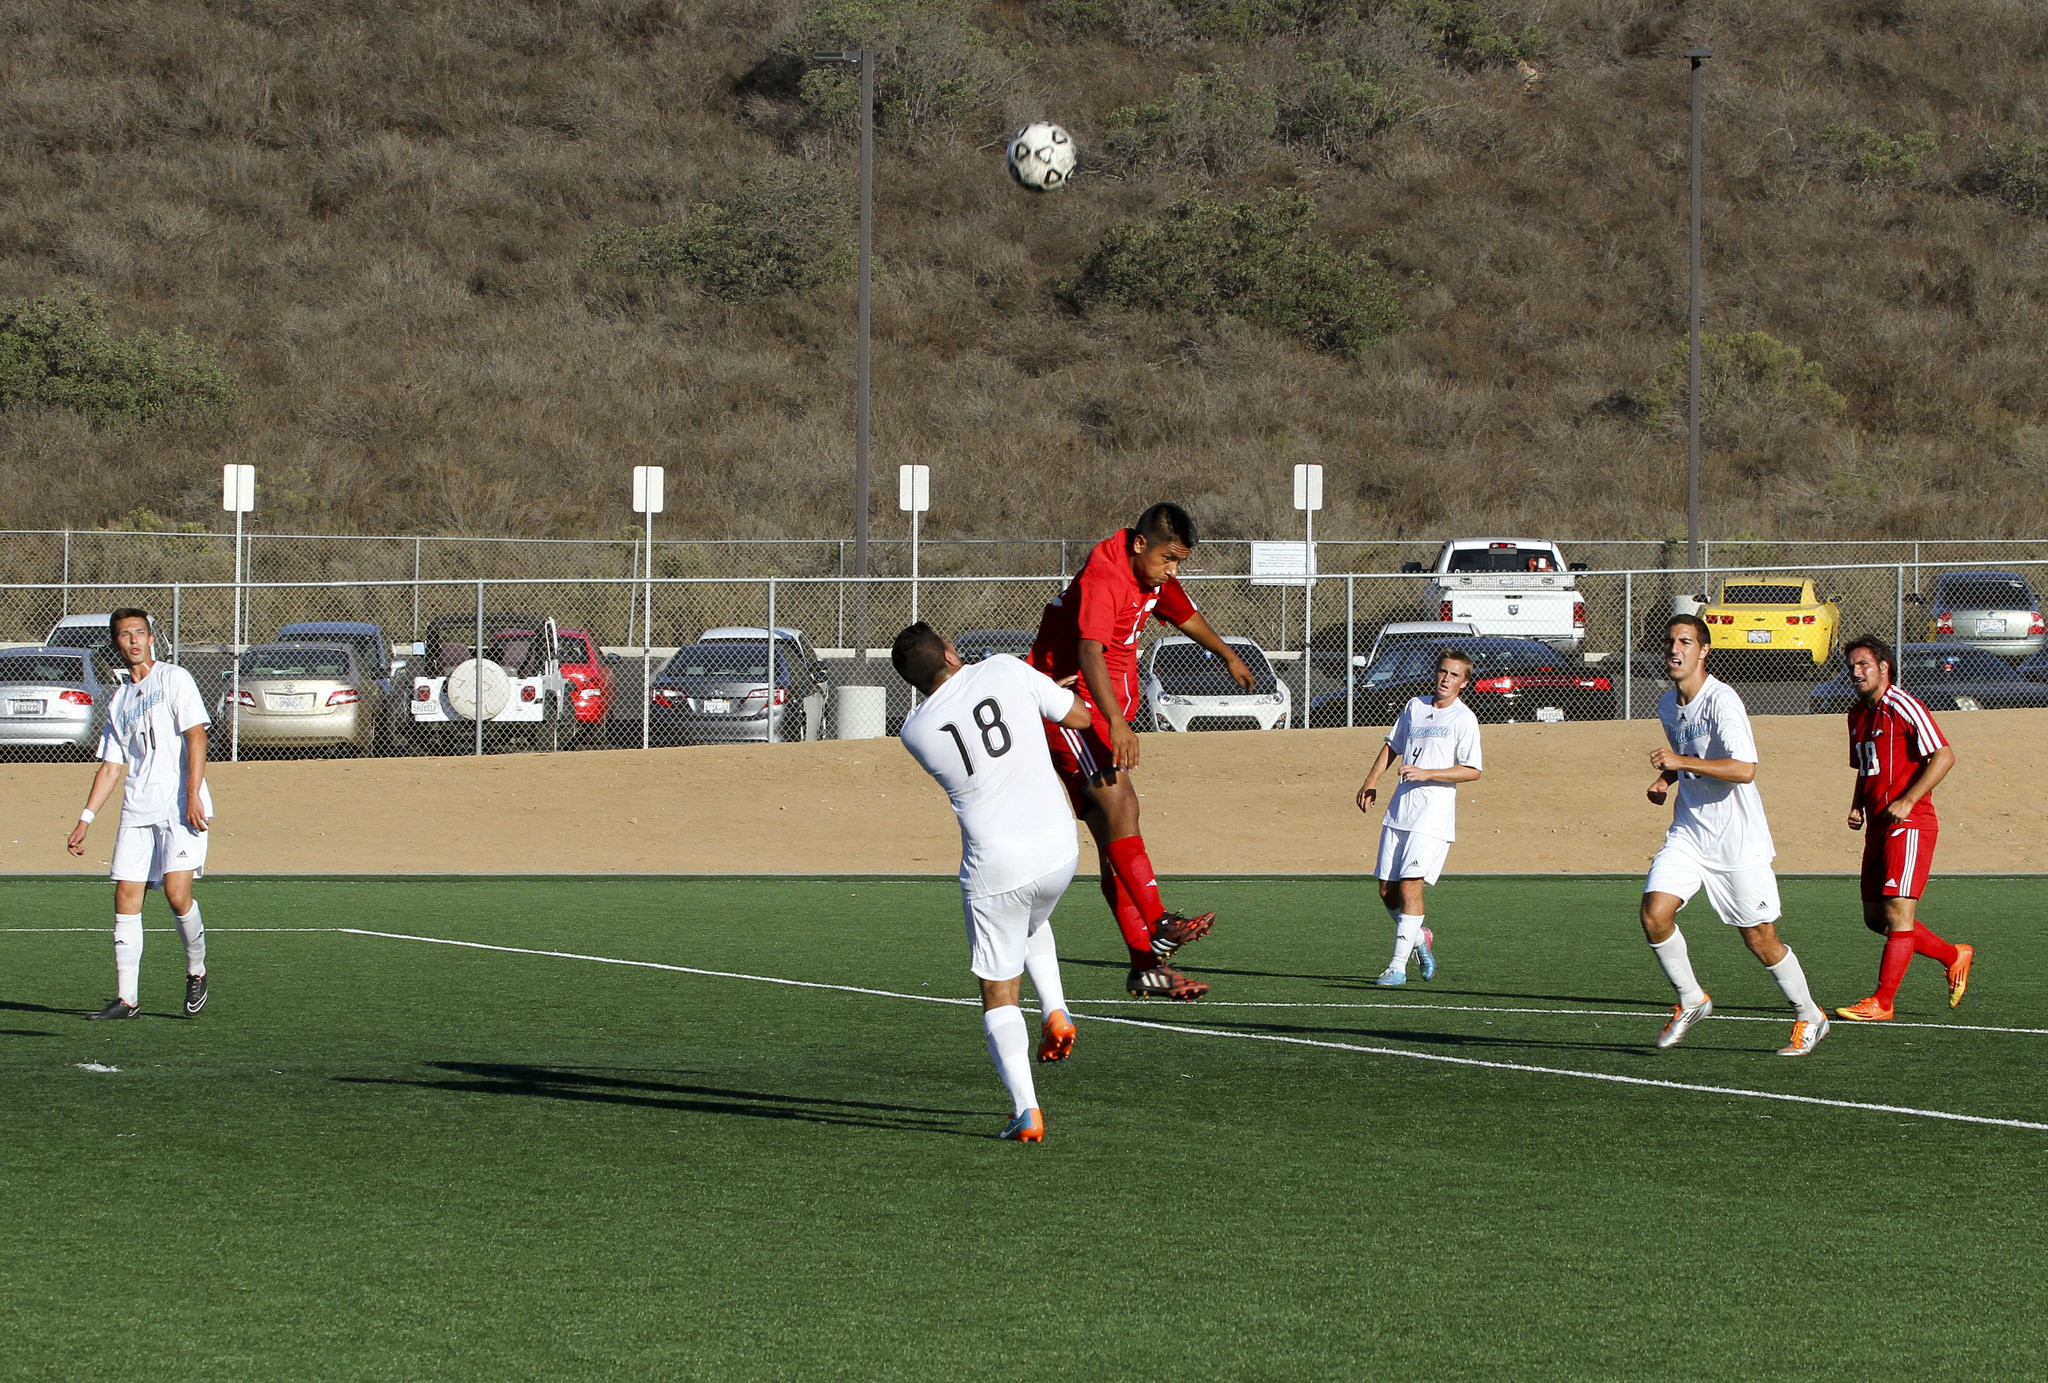 Palomar's midfielder Oscar Meija (No.23) heads the ball during a game against Cuyamaca on October 24th at Minkoff Field San Marcos, California. Comet's 2-0 loss to Cuyamaca.